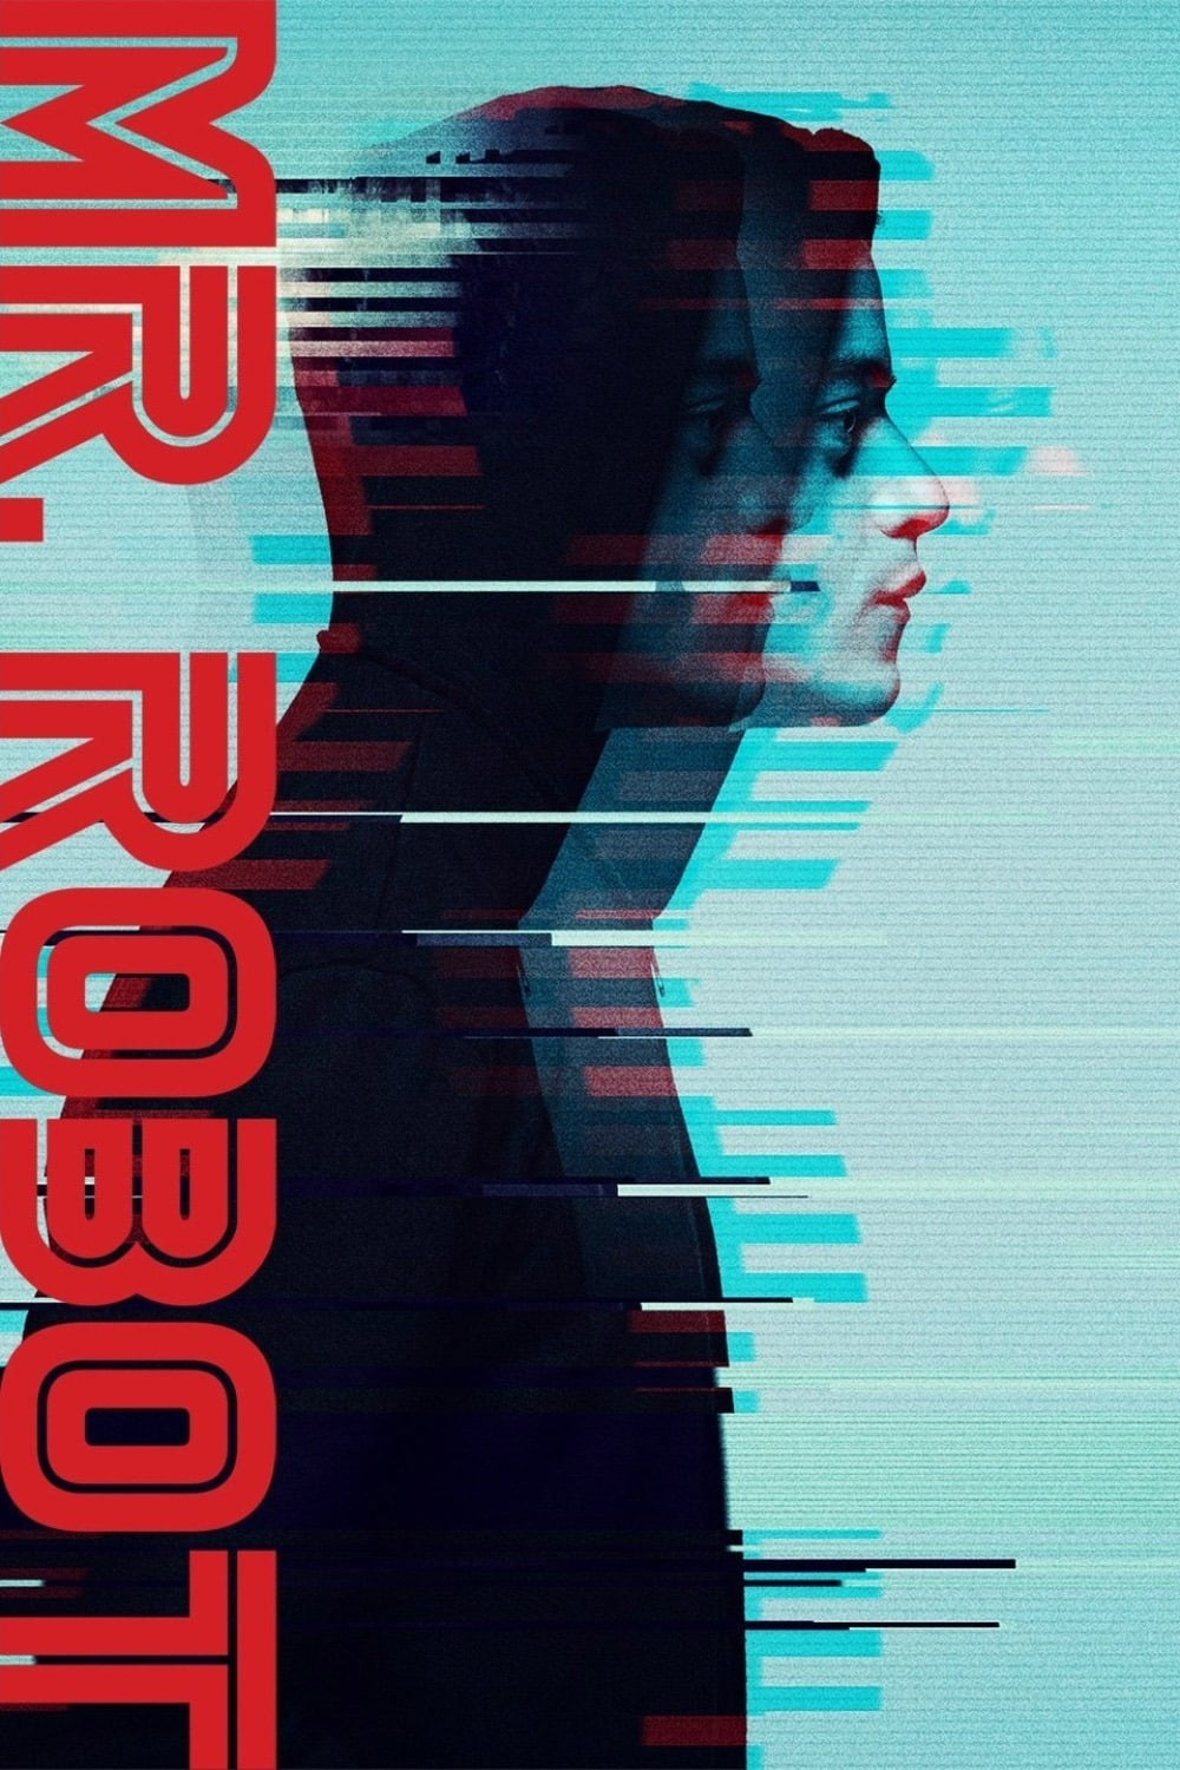 Image of Mr. Robot poster.